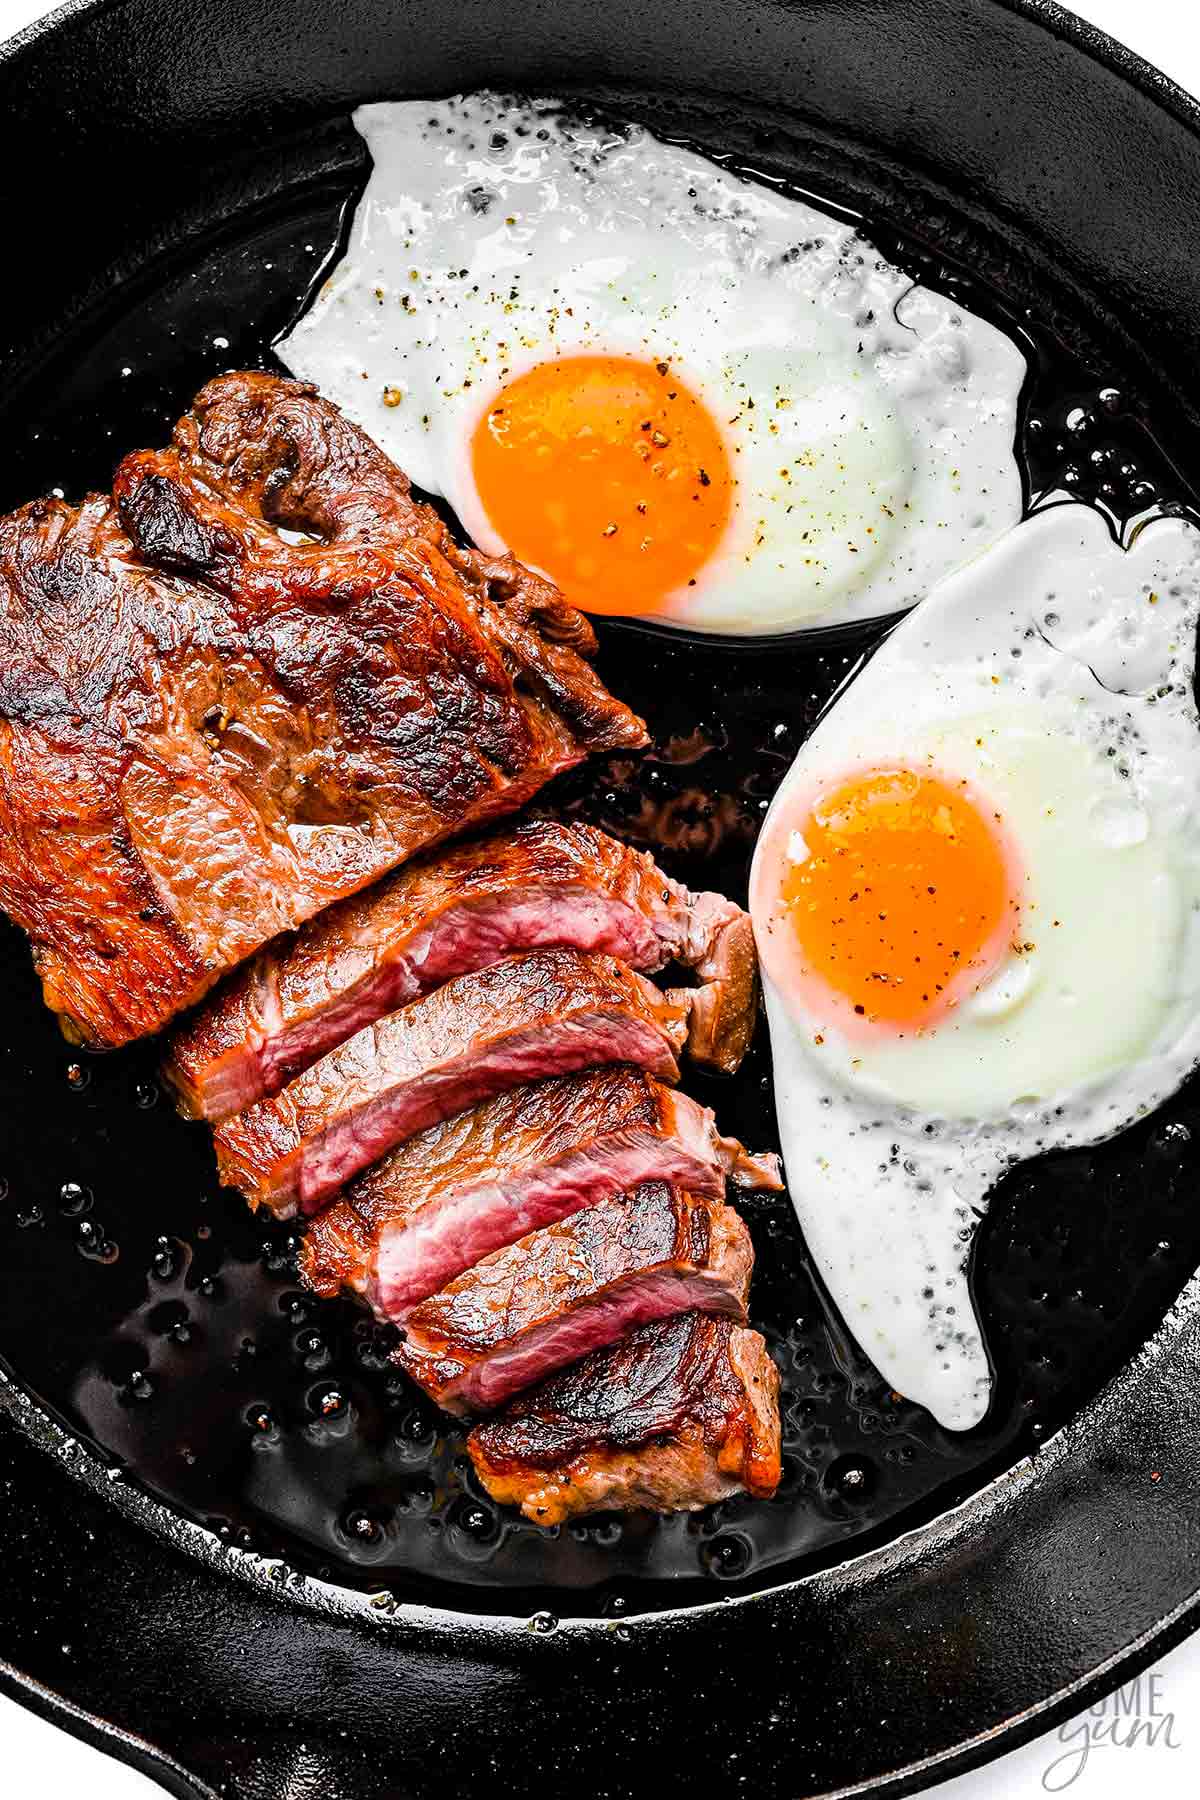 Steak and eggs in a cast iron skillet.